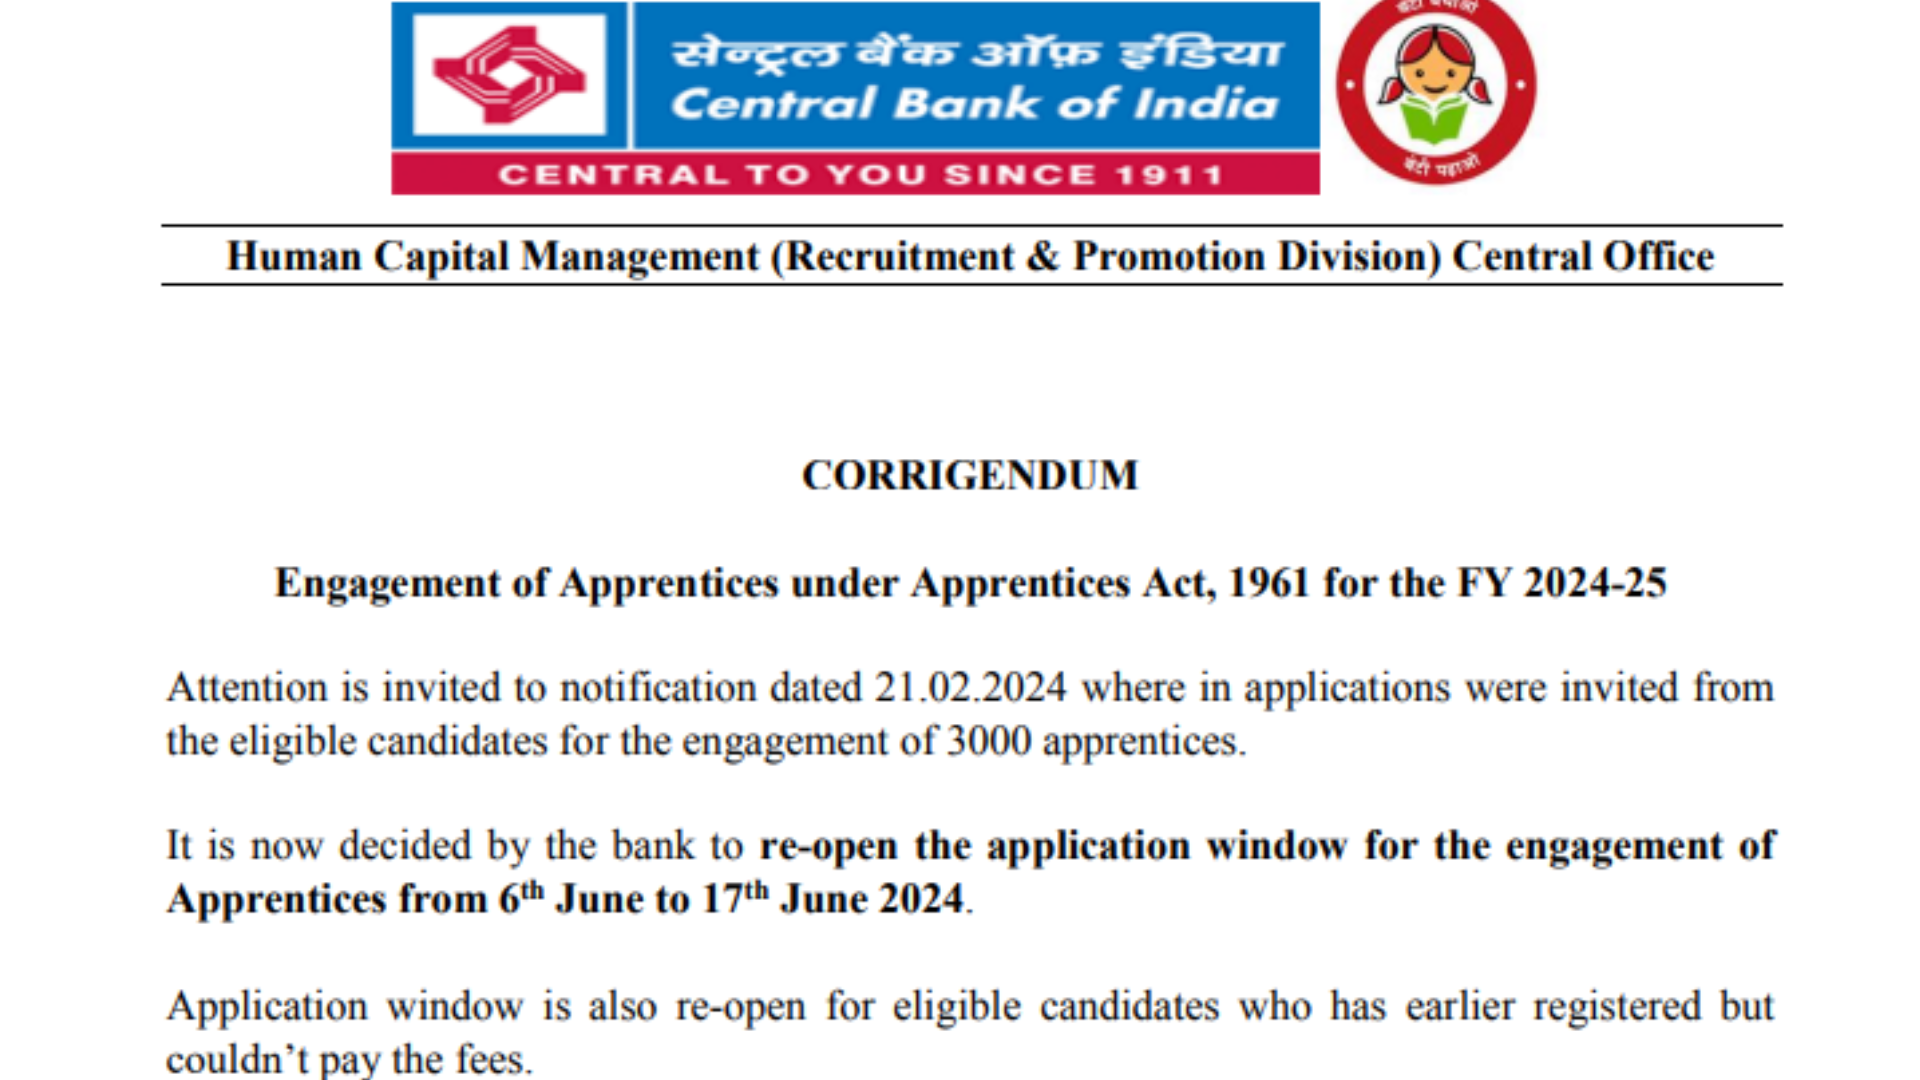 Central Bank of India CBI Apprentices Recruitment 2024 Apply Online Re Open for 3000 Post